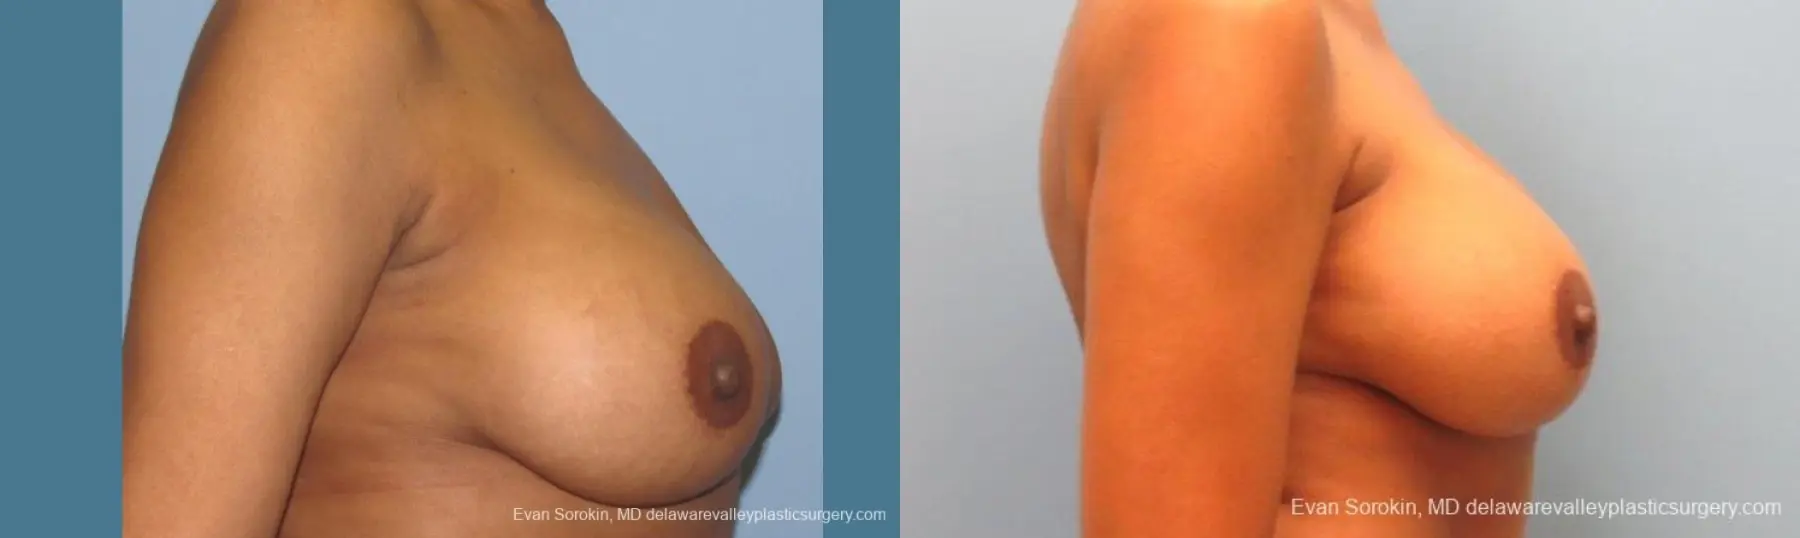 Philadelphia Breast Augmentation 10112 - Before and After 5